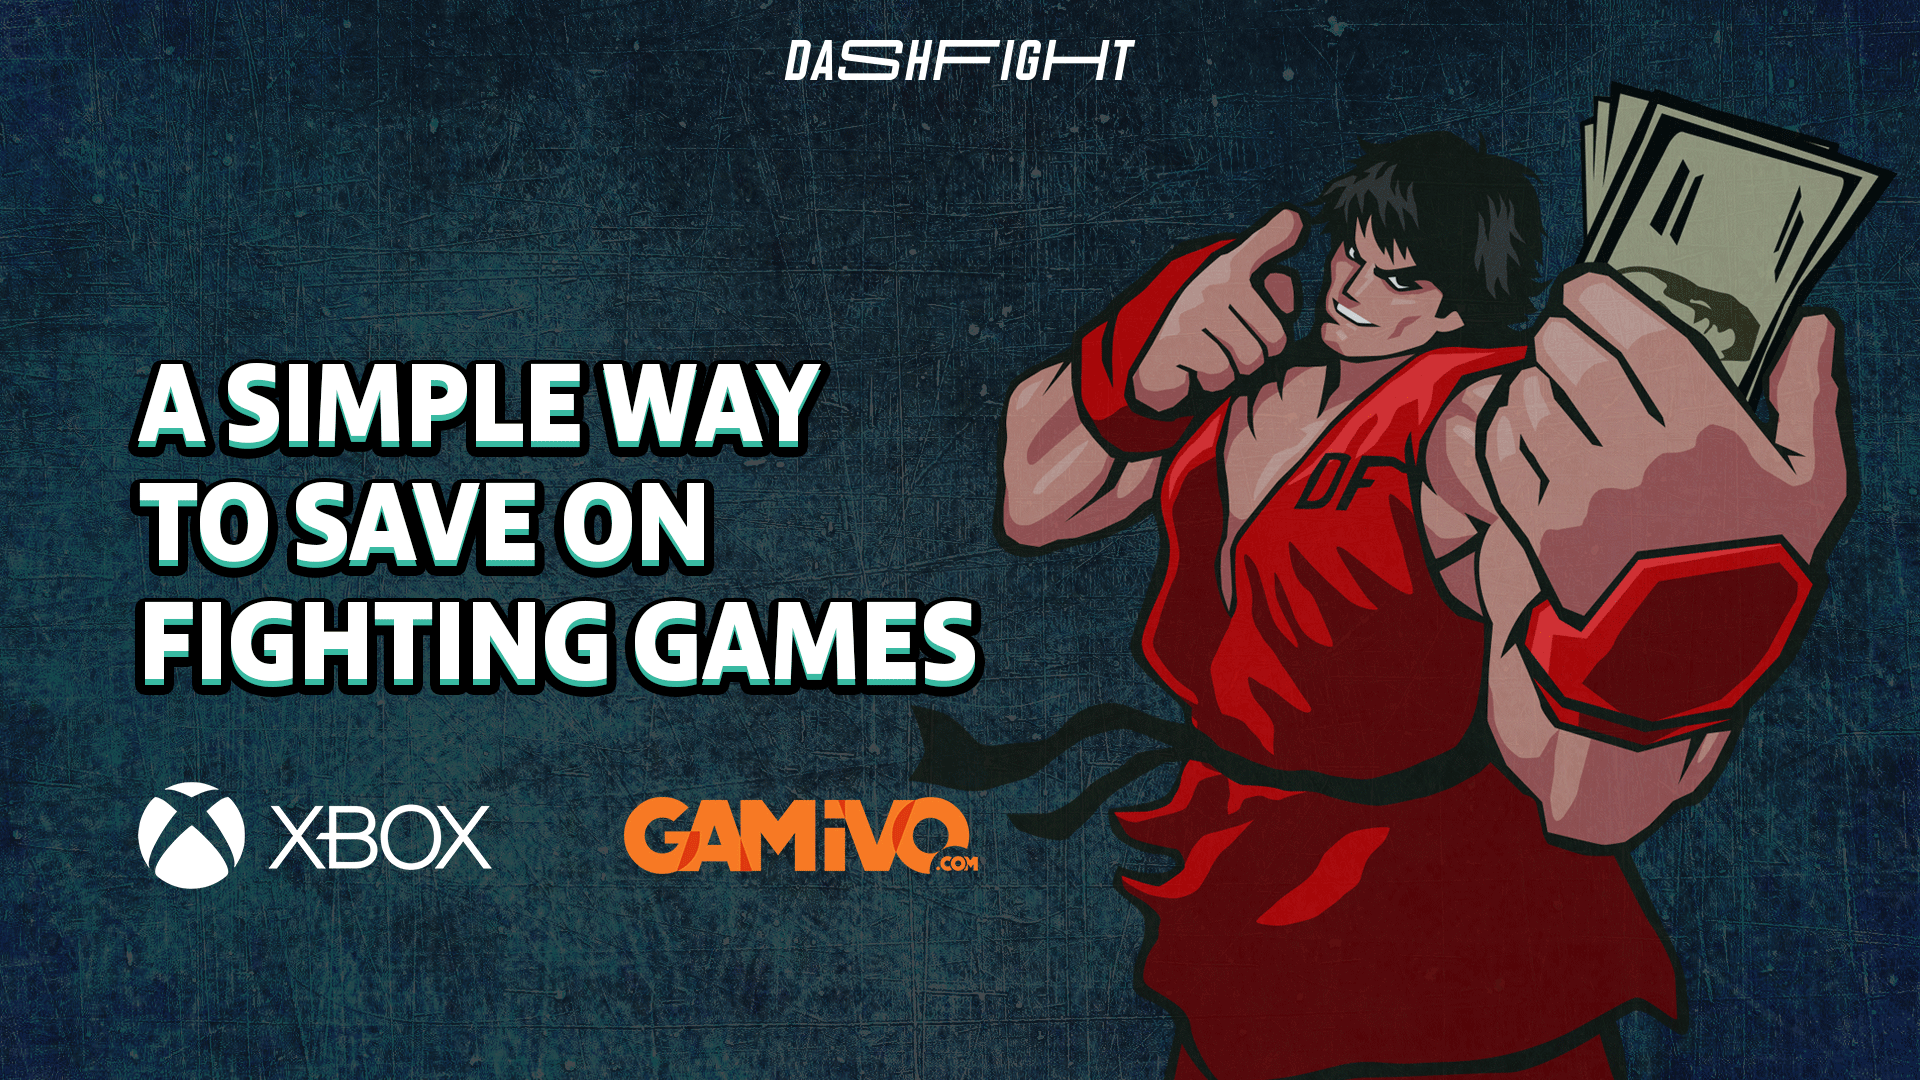 A simple way to save on fighting games